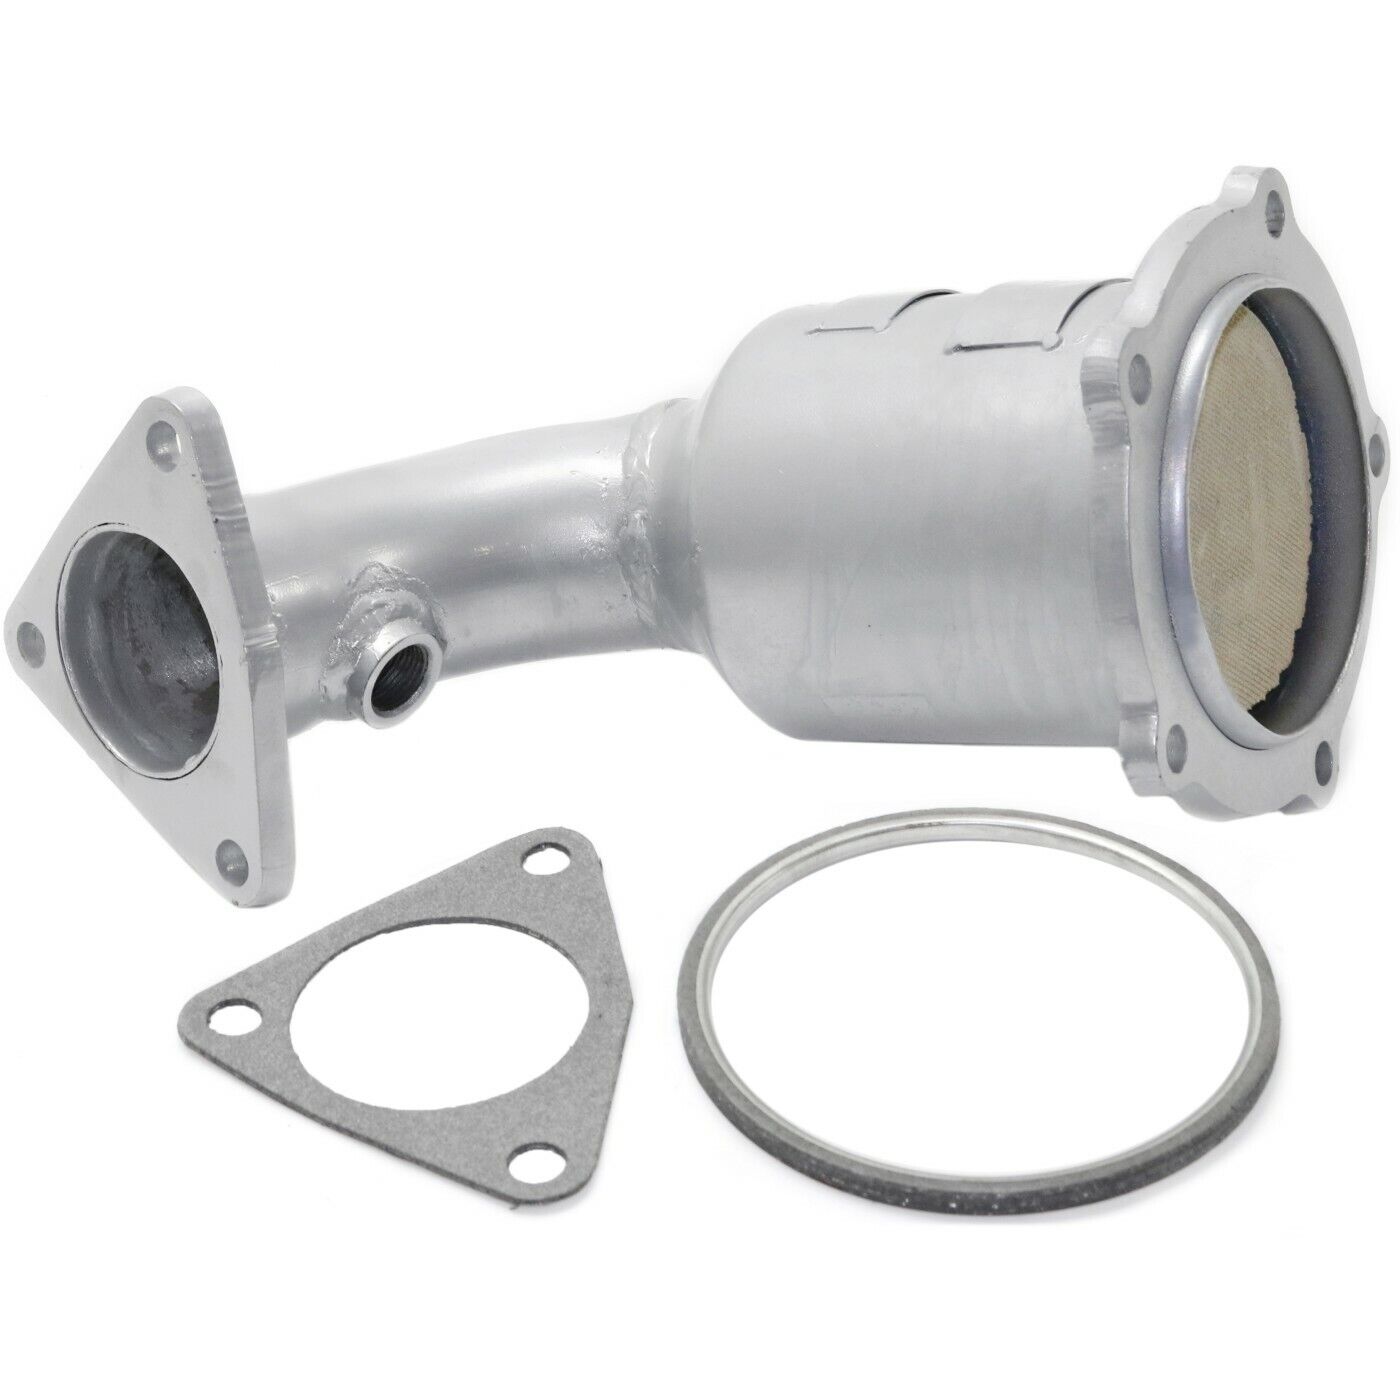 New Catalytic Converter For 1999-2001 Infiniti I30 Nissan Maxima Front